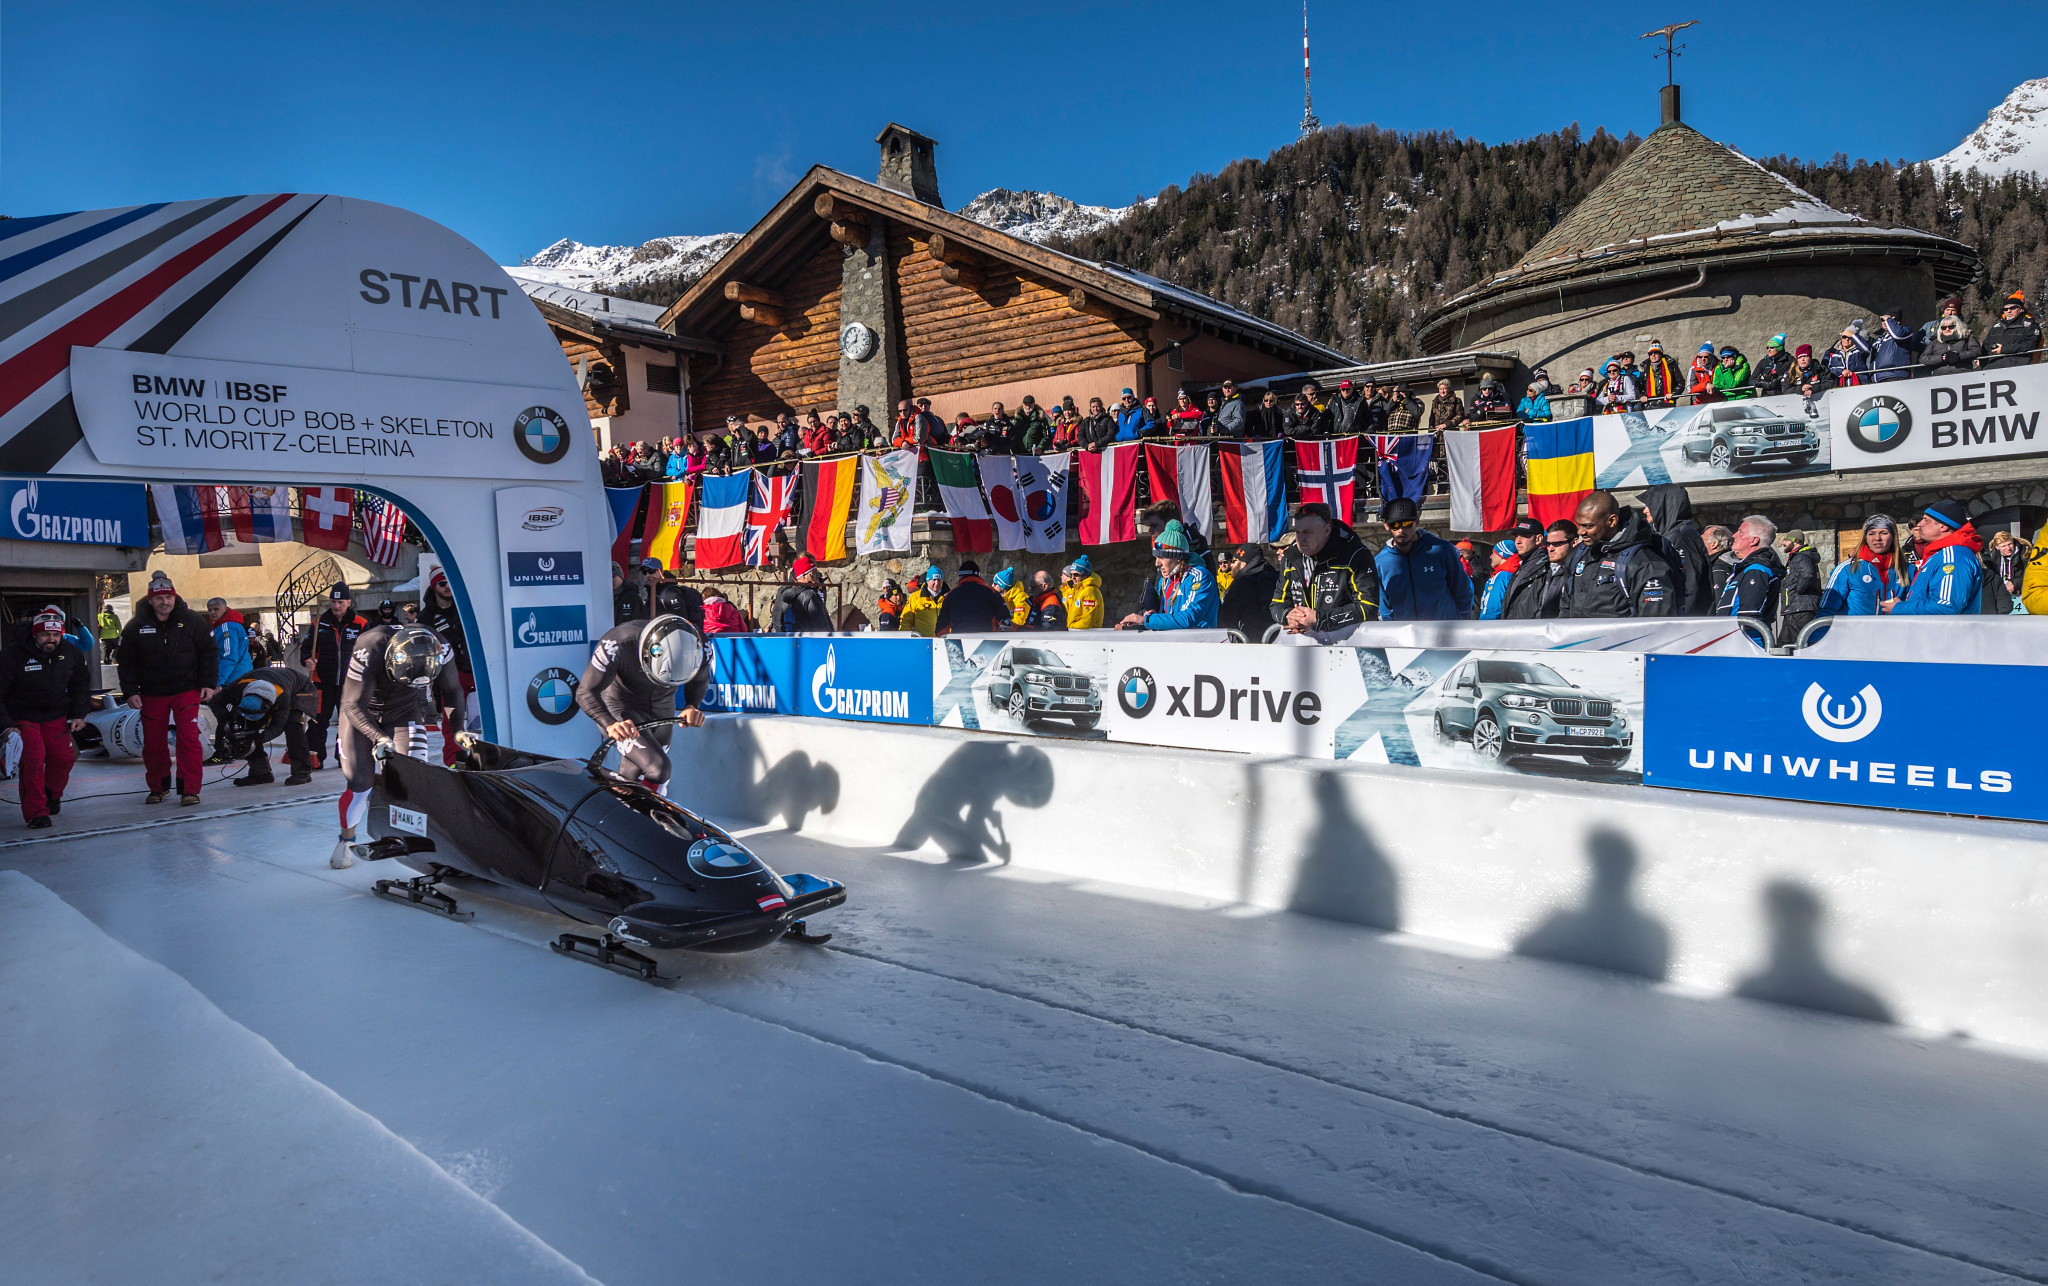 A Walk of Fame and Hall of Fame are to be inaugurated at the famous Olympic Bob Run in St. Moritz during this year's IBSF Bobsleigh, Skeleton and Para Bobsleigh World Championships ©IBSF